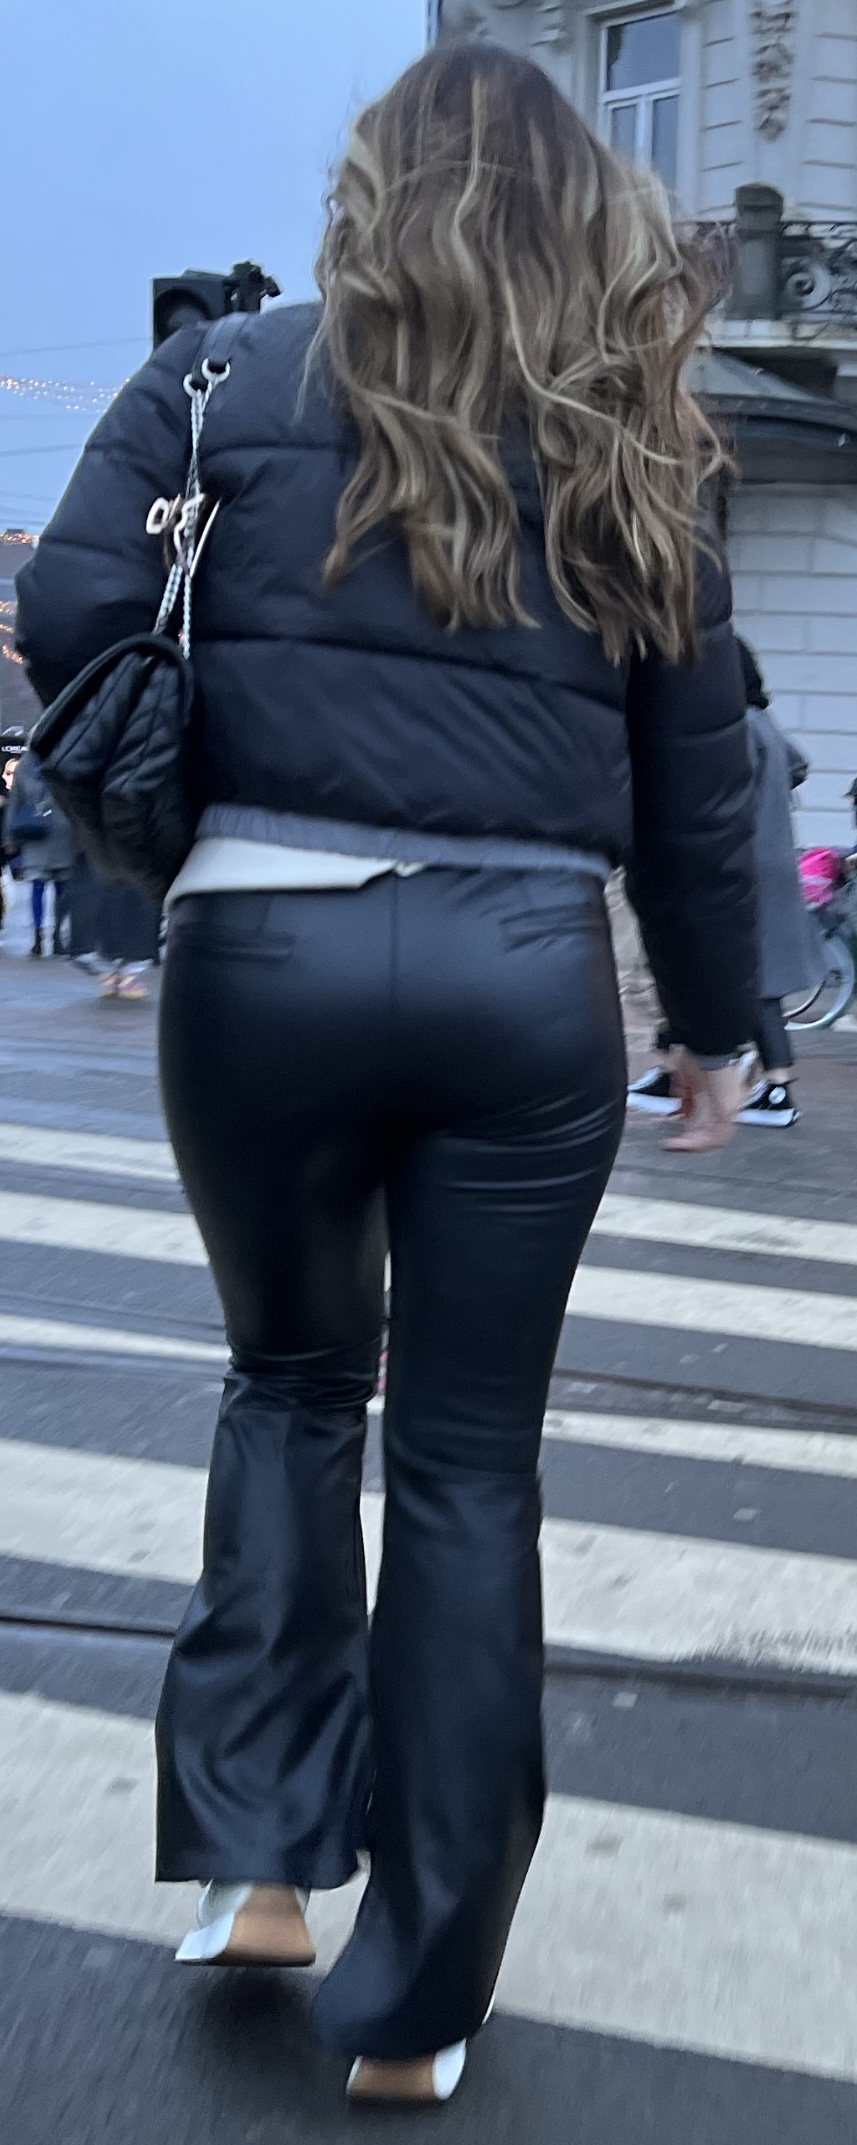 First posts, what do you think of this lovely girl? - Spandex, Leggings ...